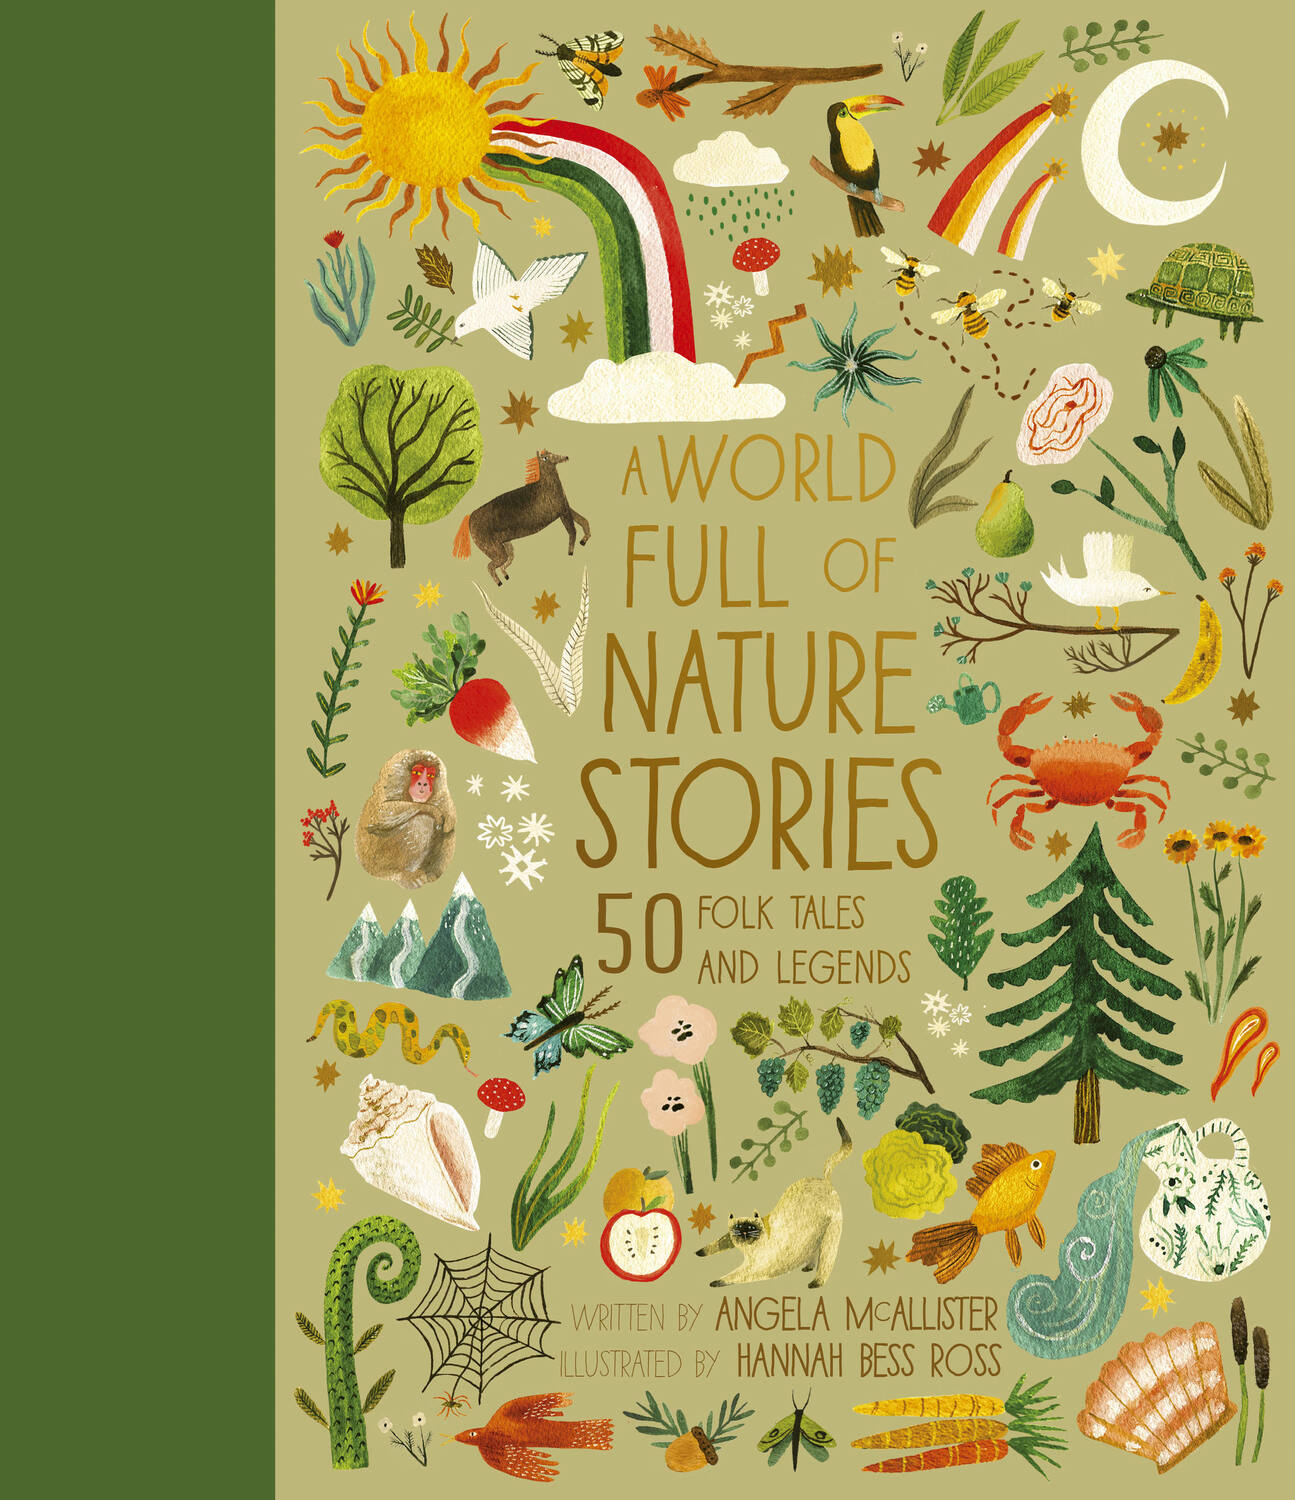 A World Full of Nature Stories: 50 Folk Tales and Legends